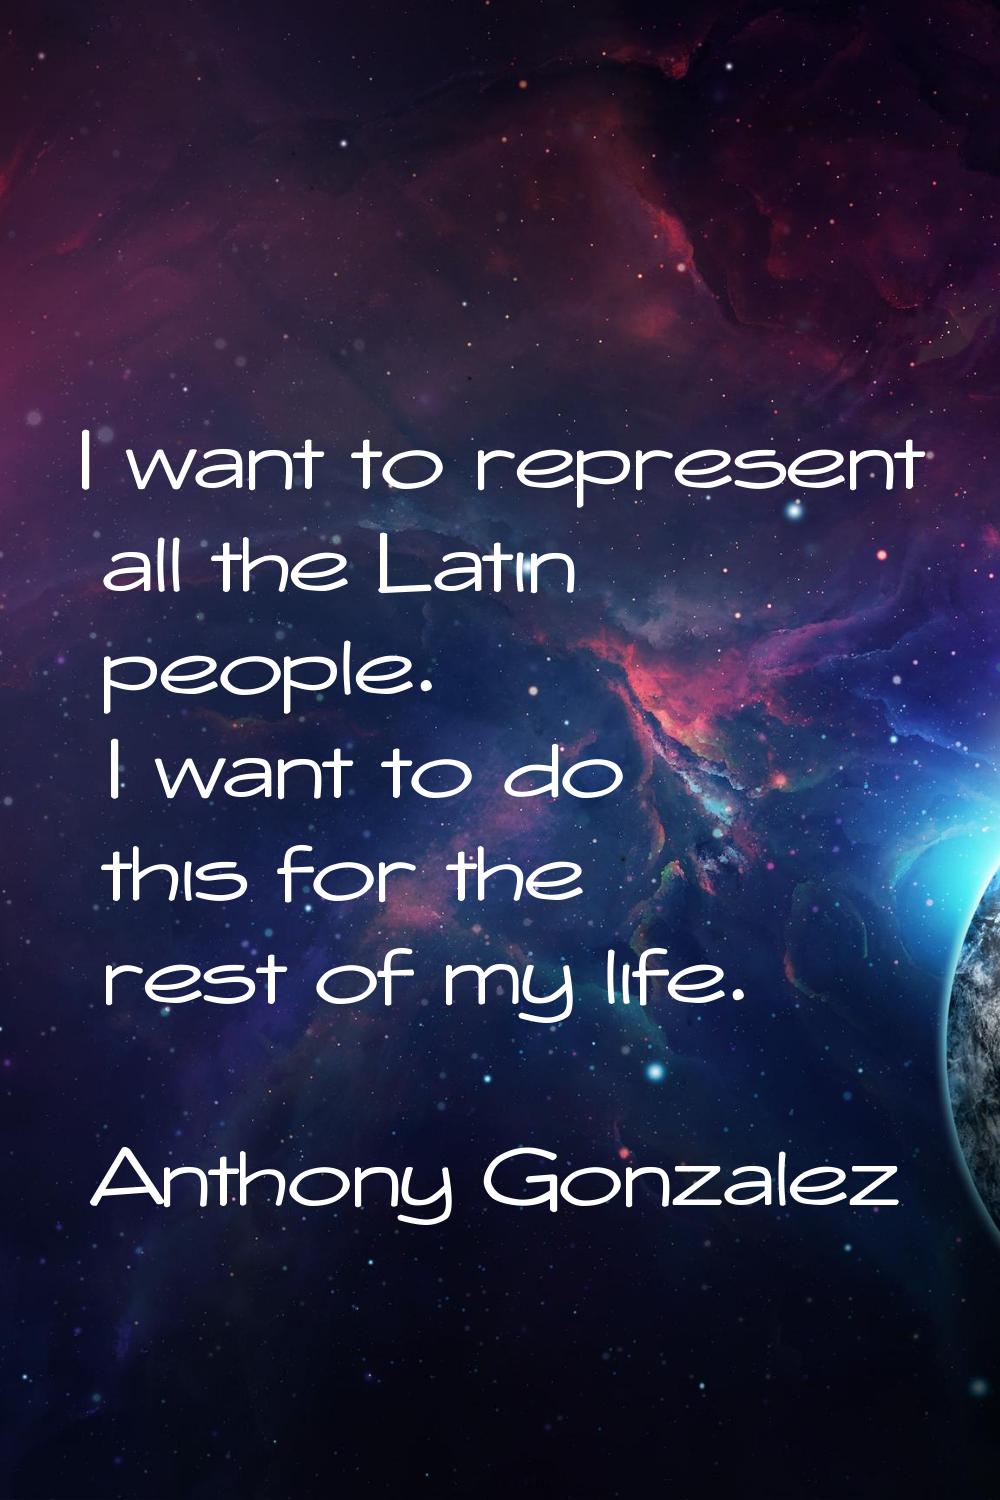 I want to represent all the Latin people. I want to do this for the rest of my life.